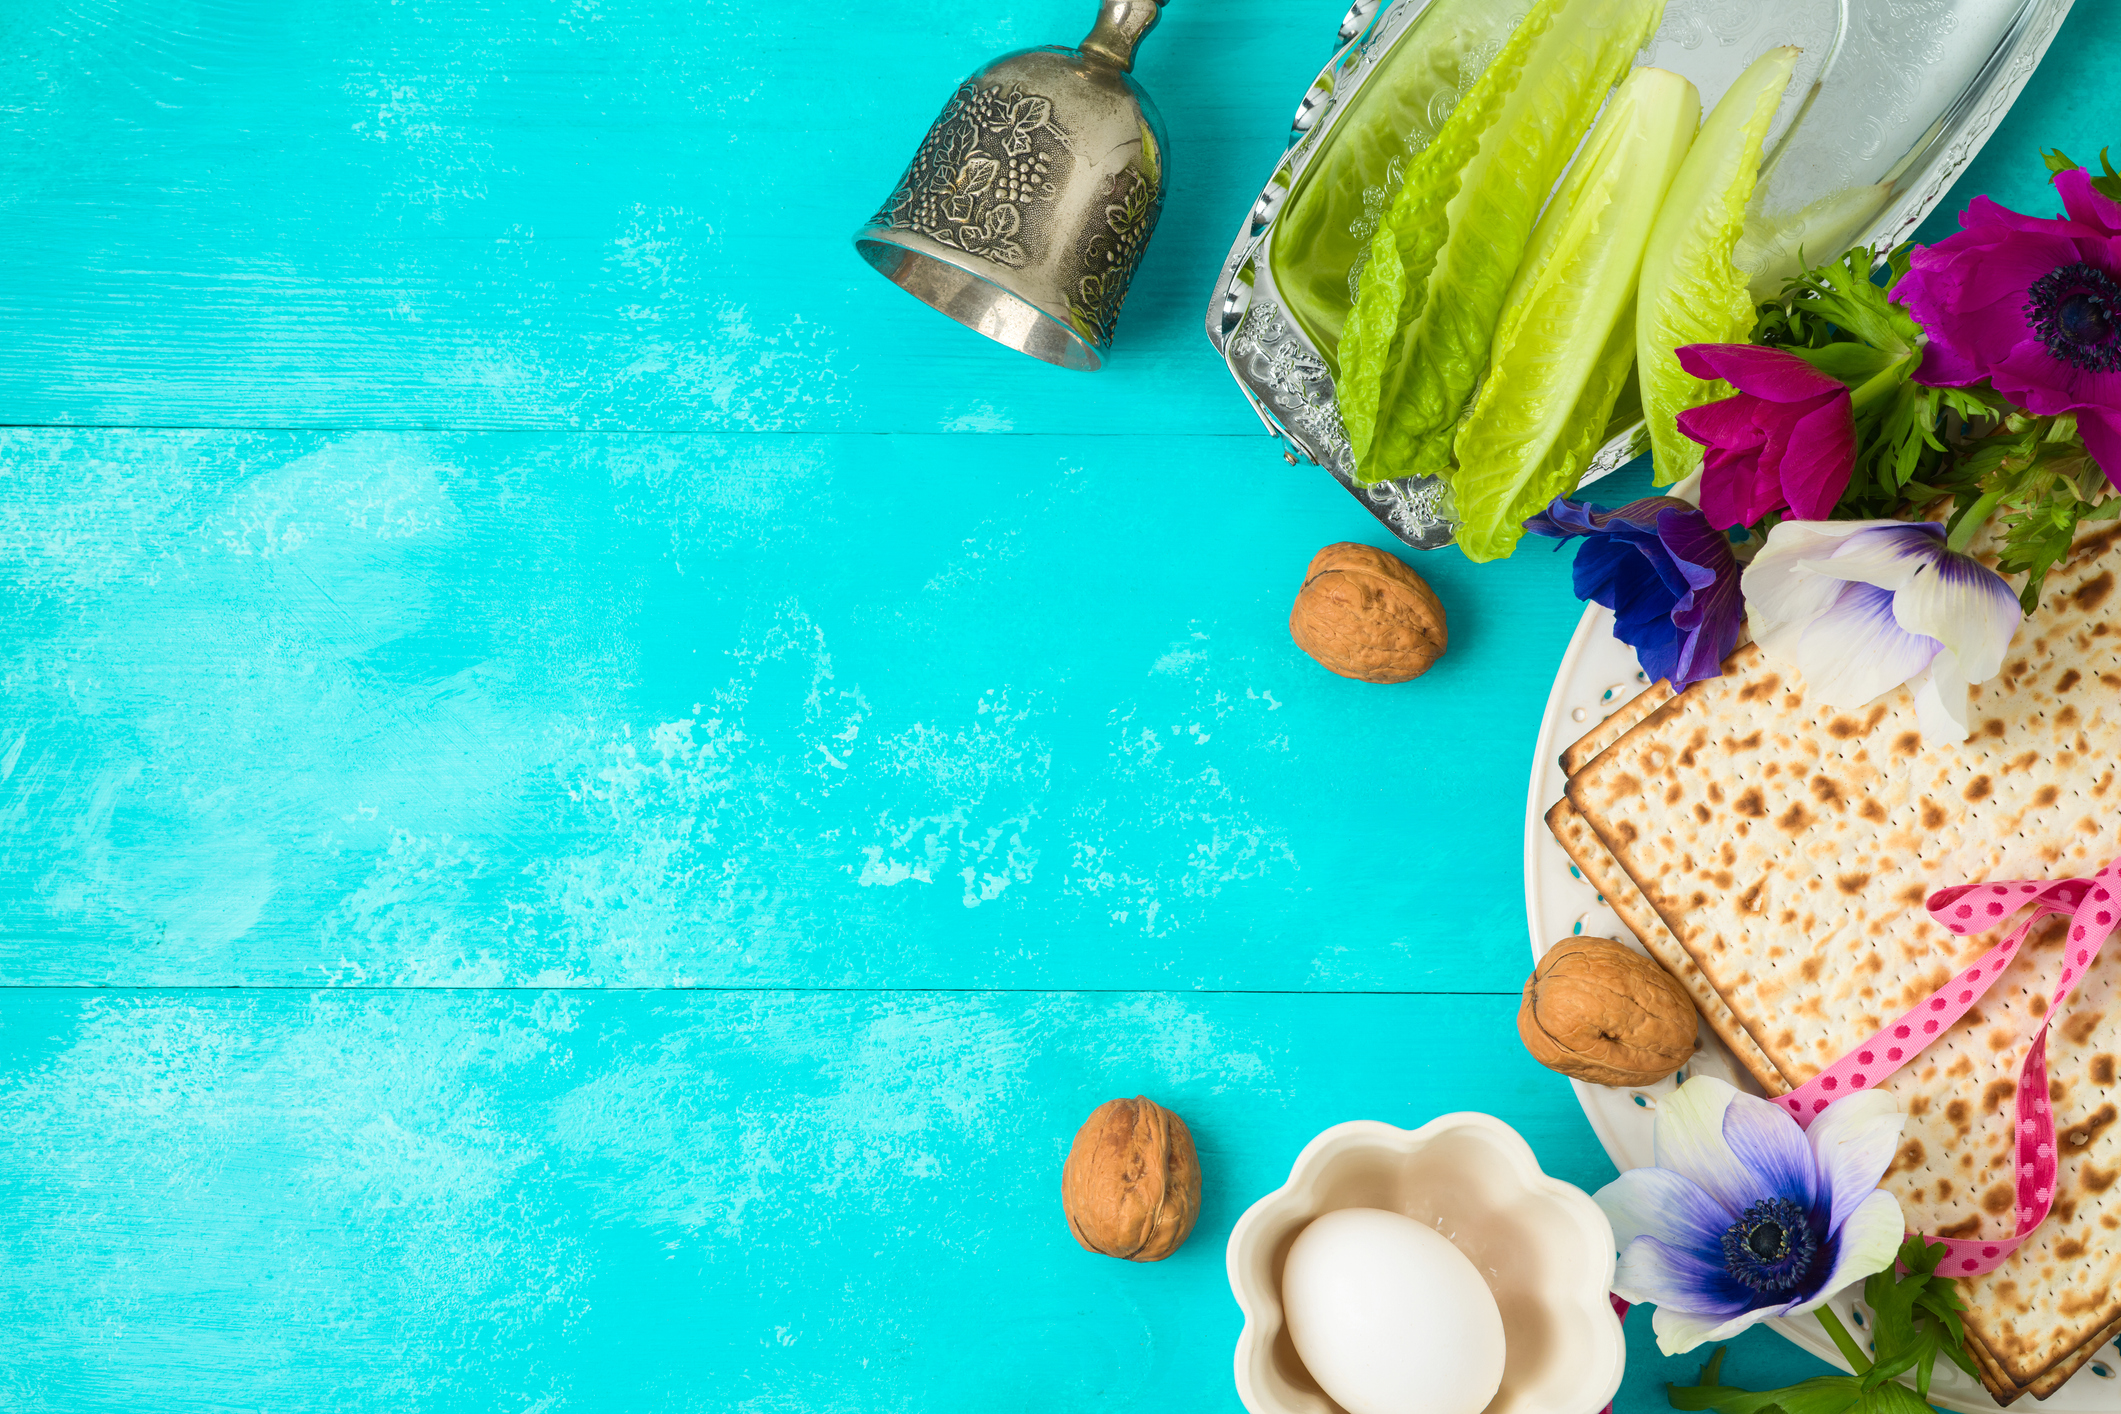 This week, East Enders have an opportunity to join in a community Passover seder